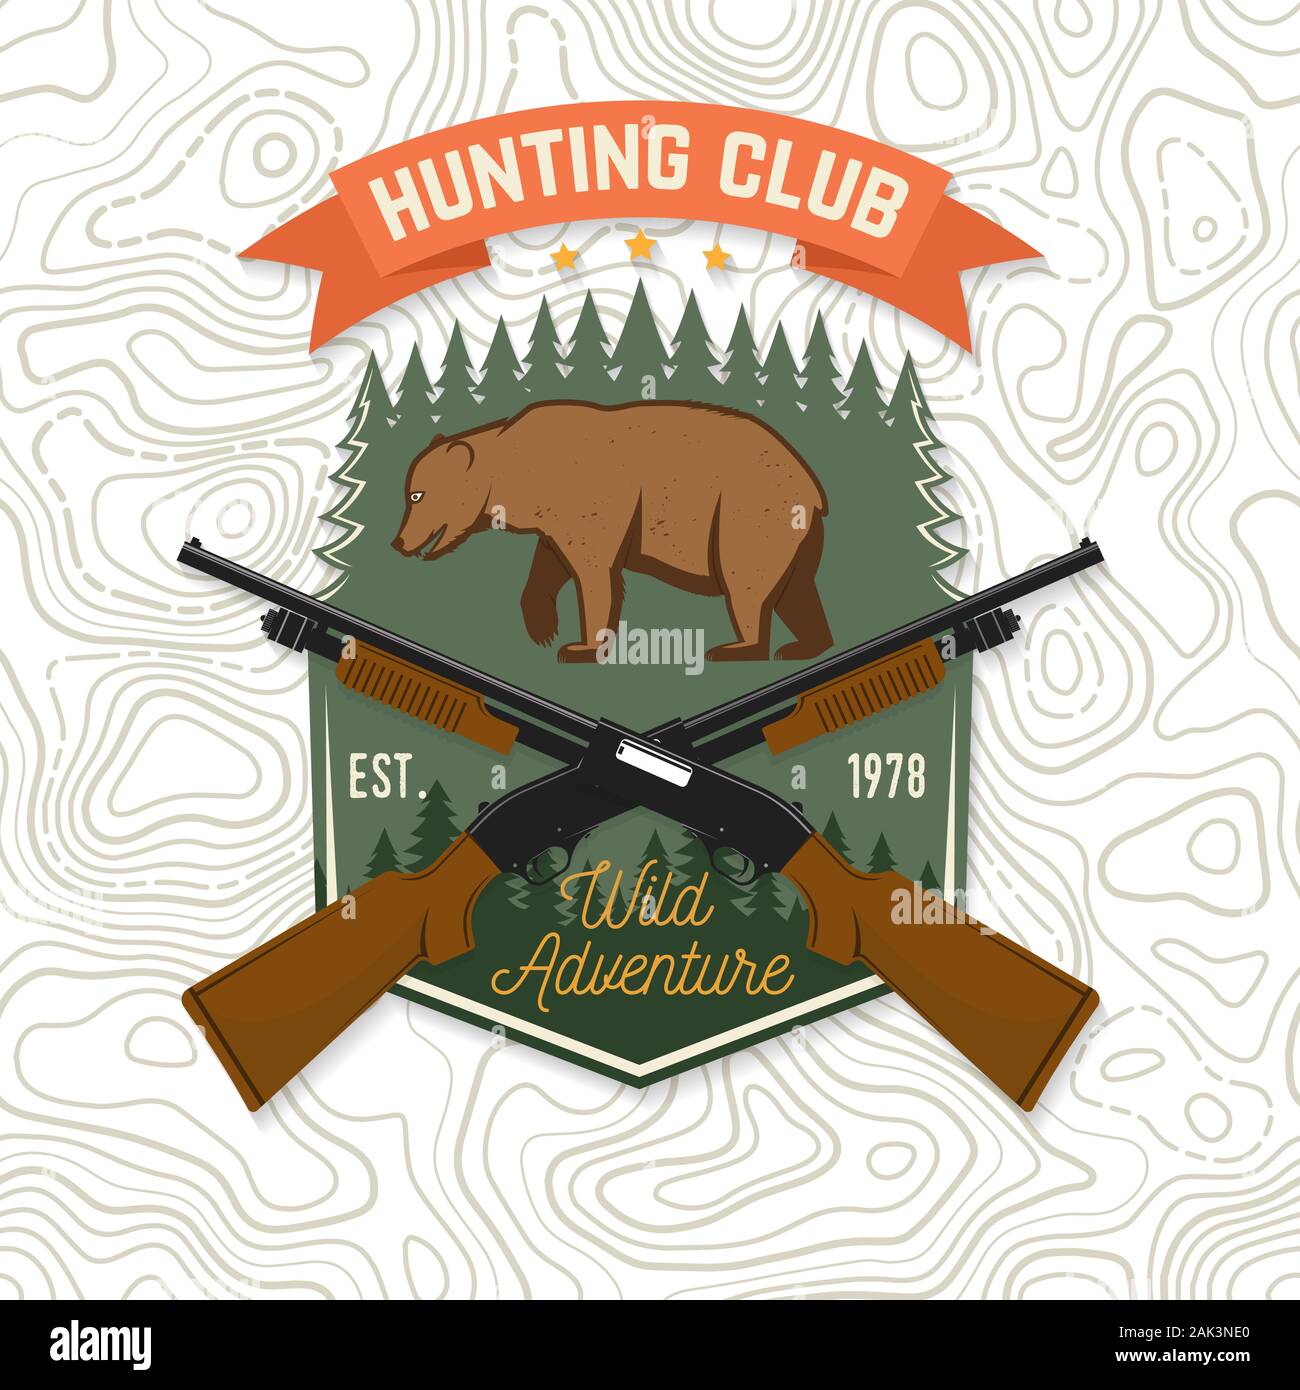 Hunting club. Vector. Concept for shirt or label, print, stamp, patch. Vintage typography design with hunting gun, bear and forest silhouette. Outdoor adventure hunt club emblem. Wild adventure. Stock Vector